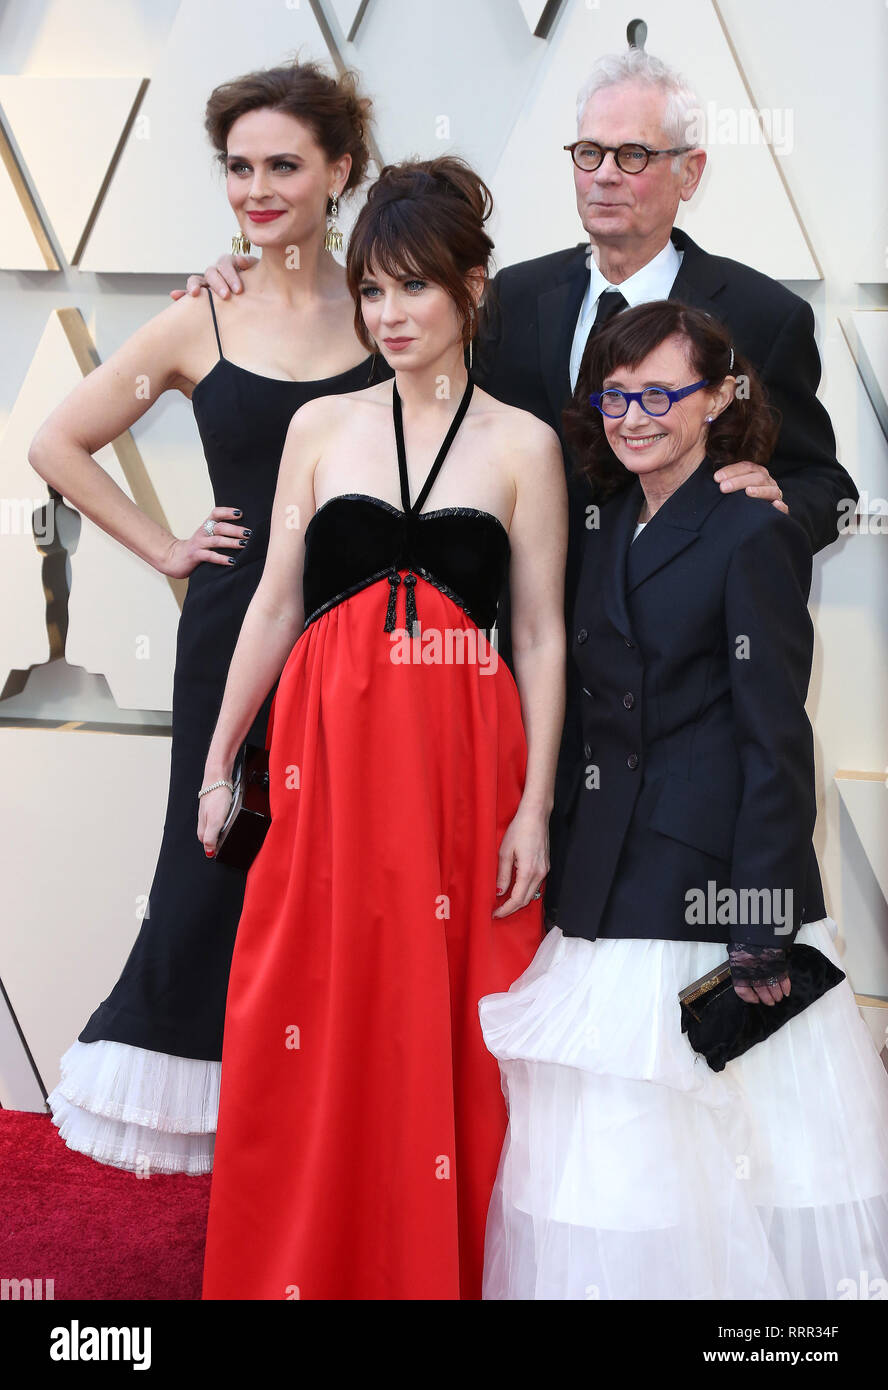 Hollywood, California, USA. 24th Feb, 2019. 24 February 2019 - Hollywood, California - Emily Deschanel, Zooey Deschanel, Caleb Deschanel, Mary Jo Deschanel. 91st Annual Academy Awards presented by the Academy of Motion Picture Arts and Sciences held at Hollywood & Highland Center. Photo Credit: AdMedia Credit: AdMedia/ZUMA Wire/Alamy Live News Stock Photo